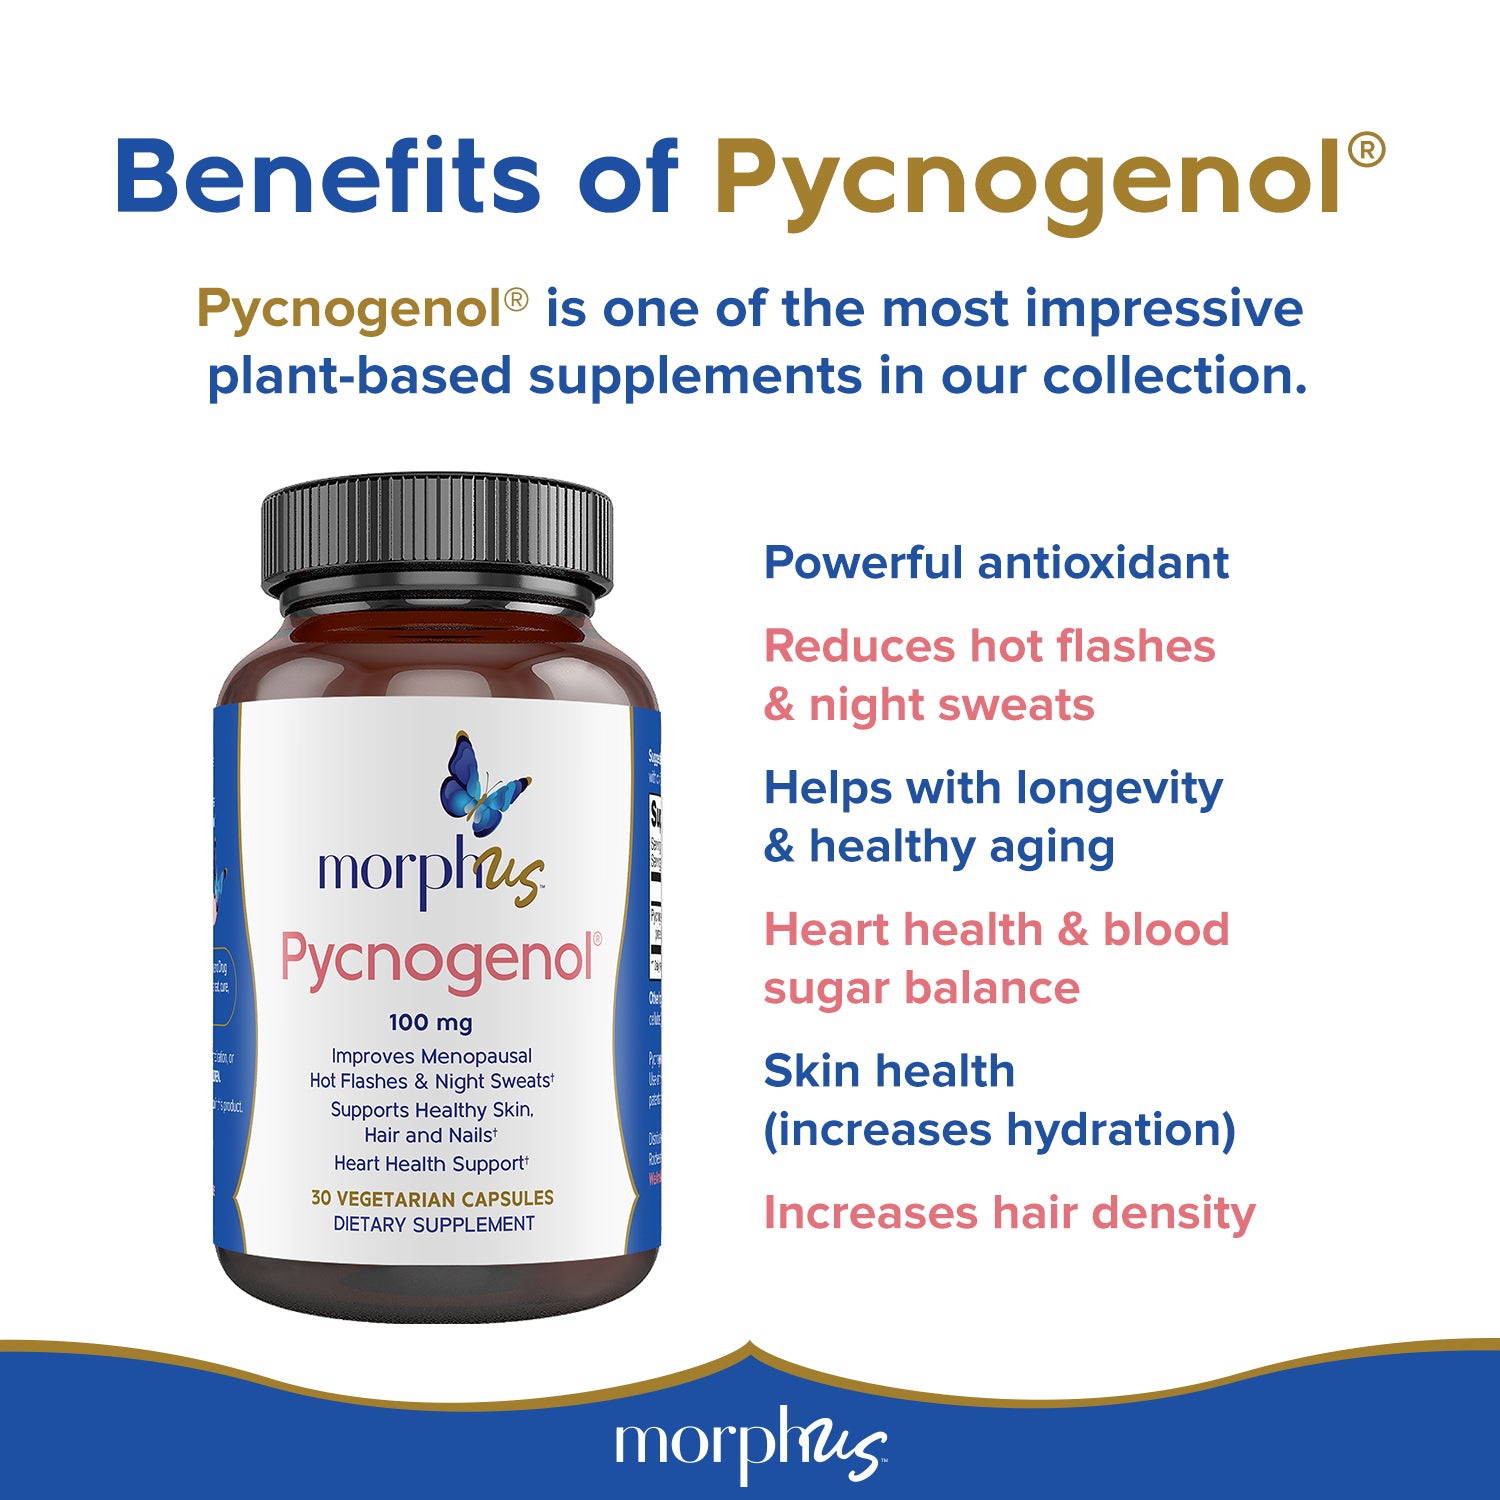 Pycnogenol and osteoporosis prevention